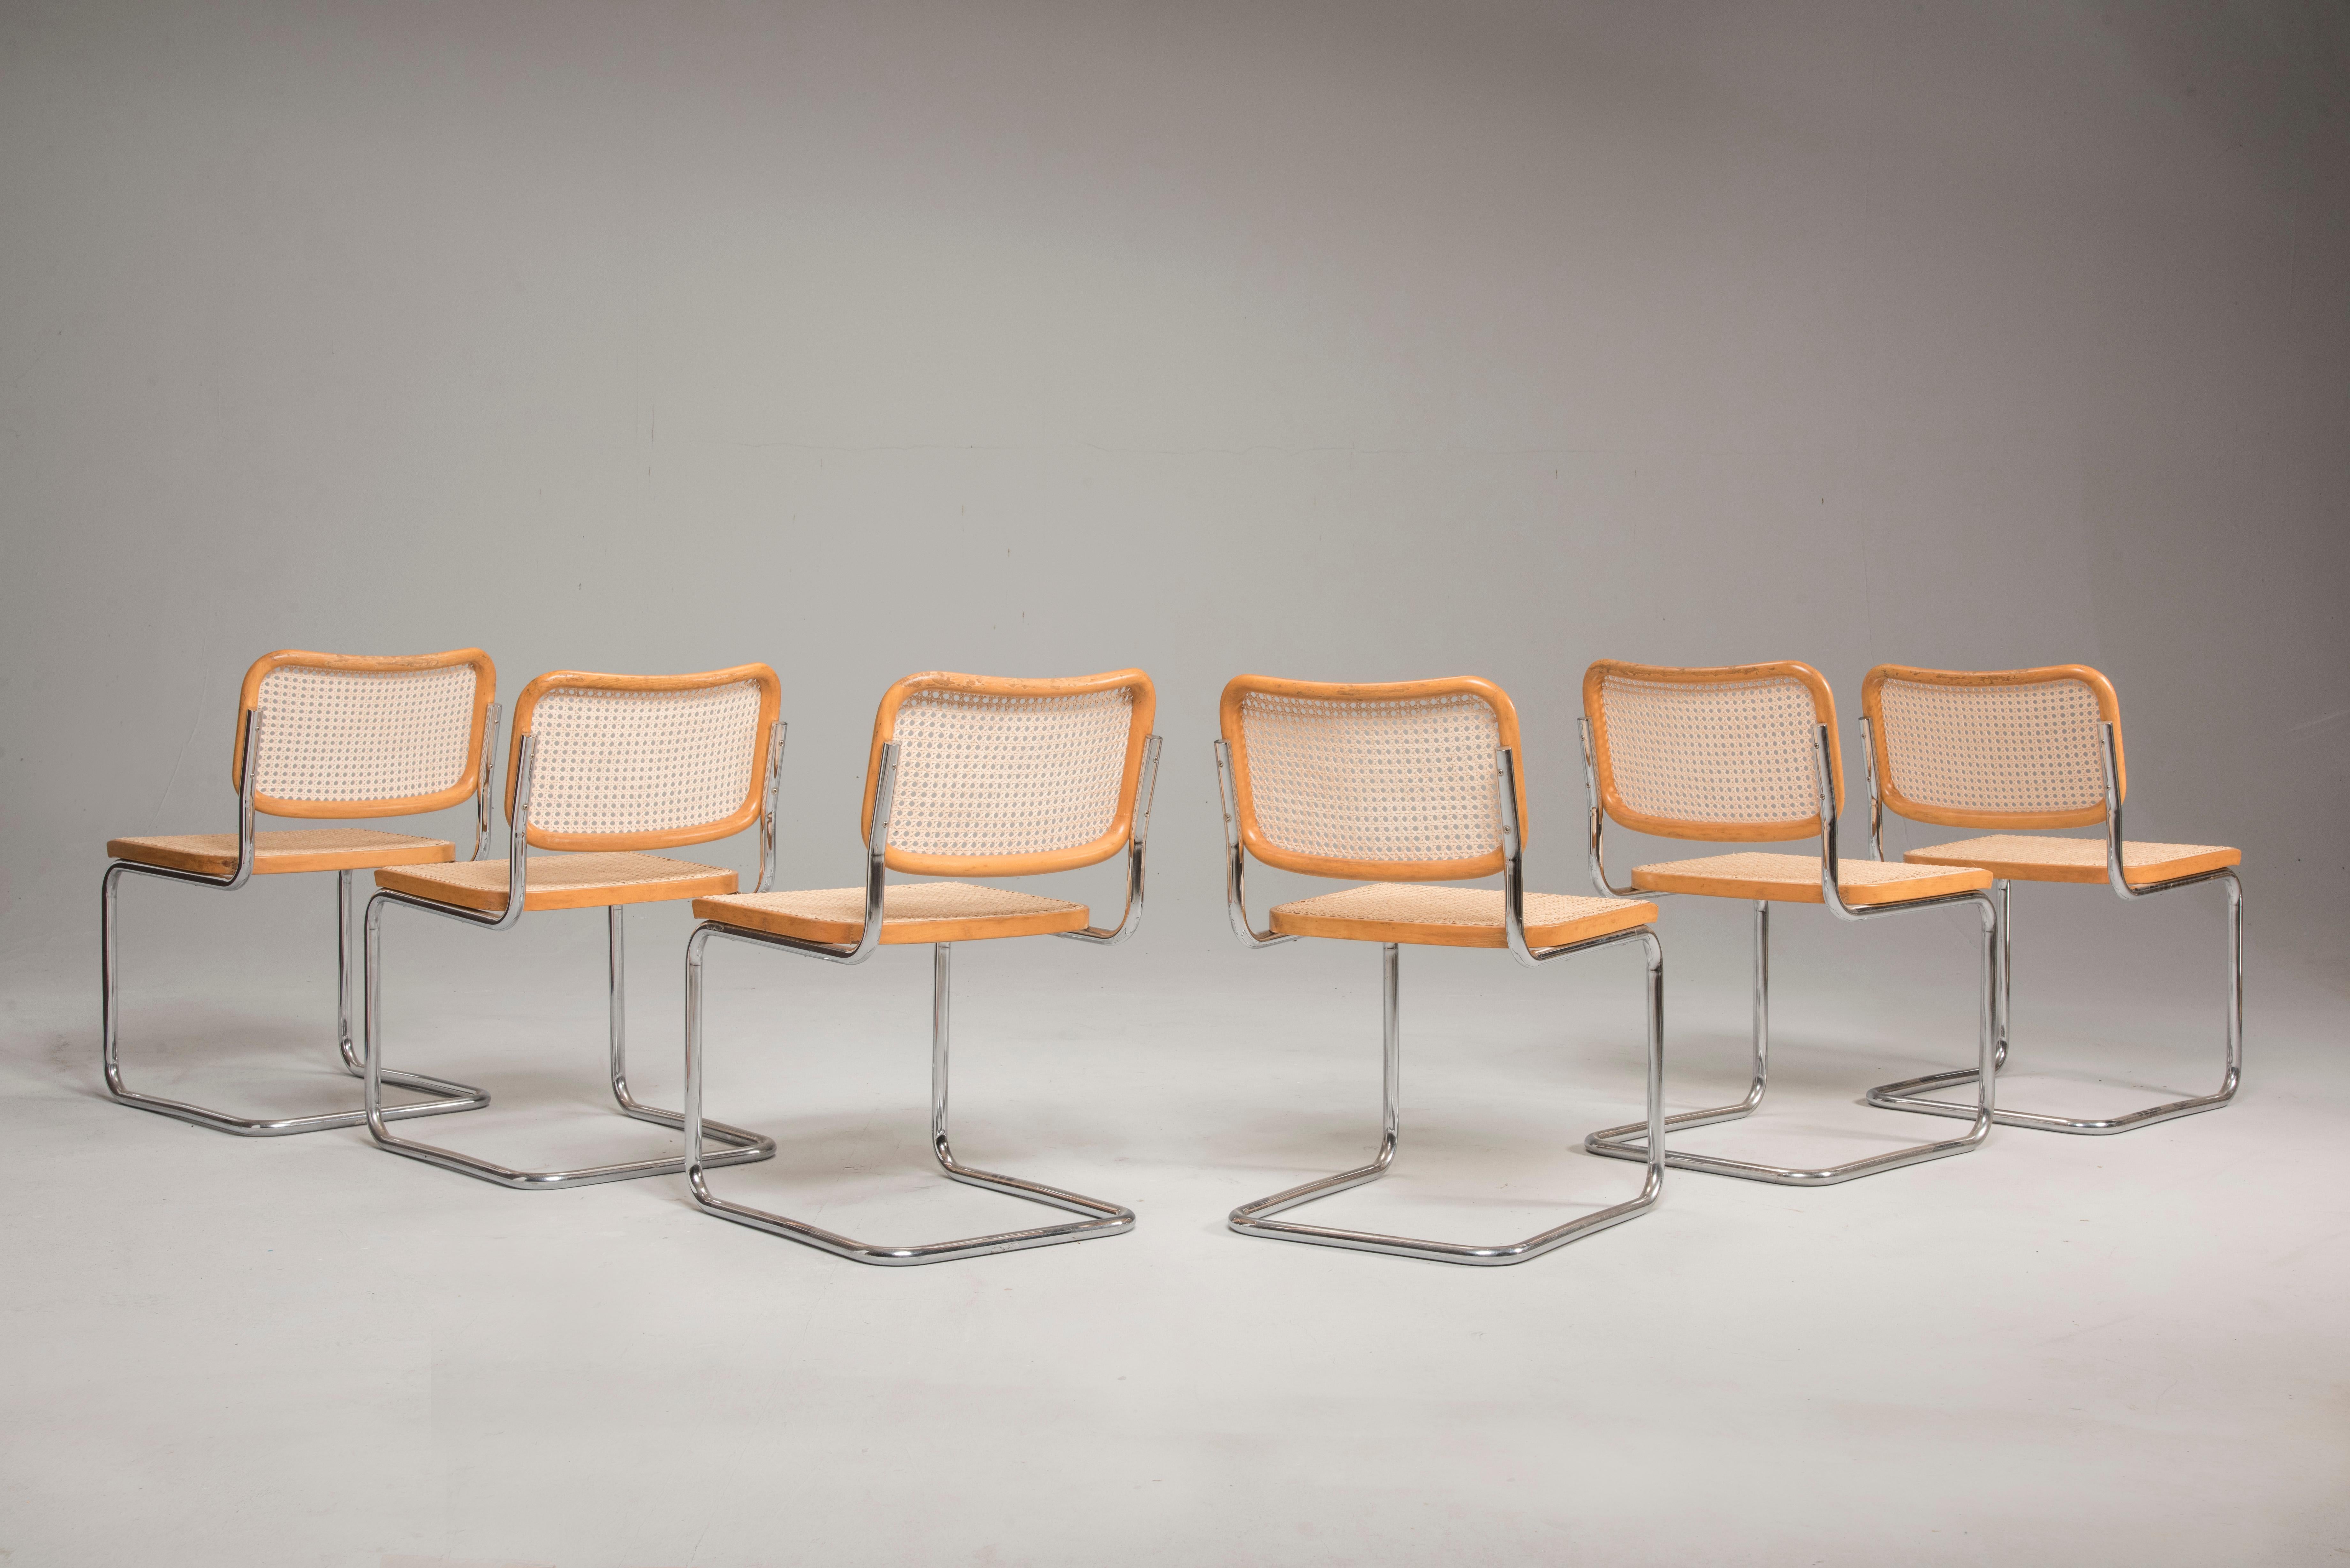 Designed in 1928, Marcel Breuer’s Cesca chair is a symbol of traditional craftsmanship mixed with Industrial methods and materials to help spreading tubular steel furniture. These chairs have handwoven cane inserts on the seats and on the backrest